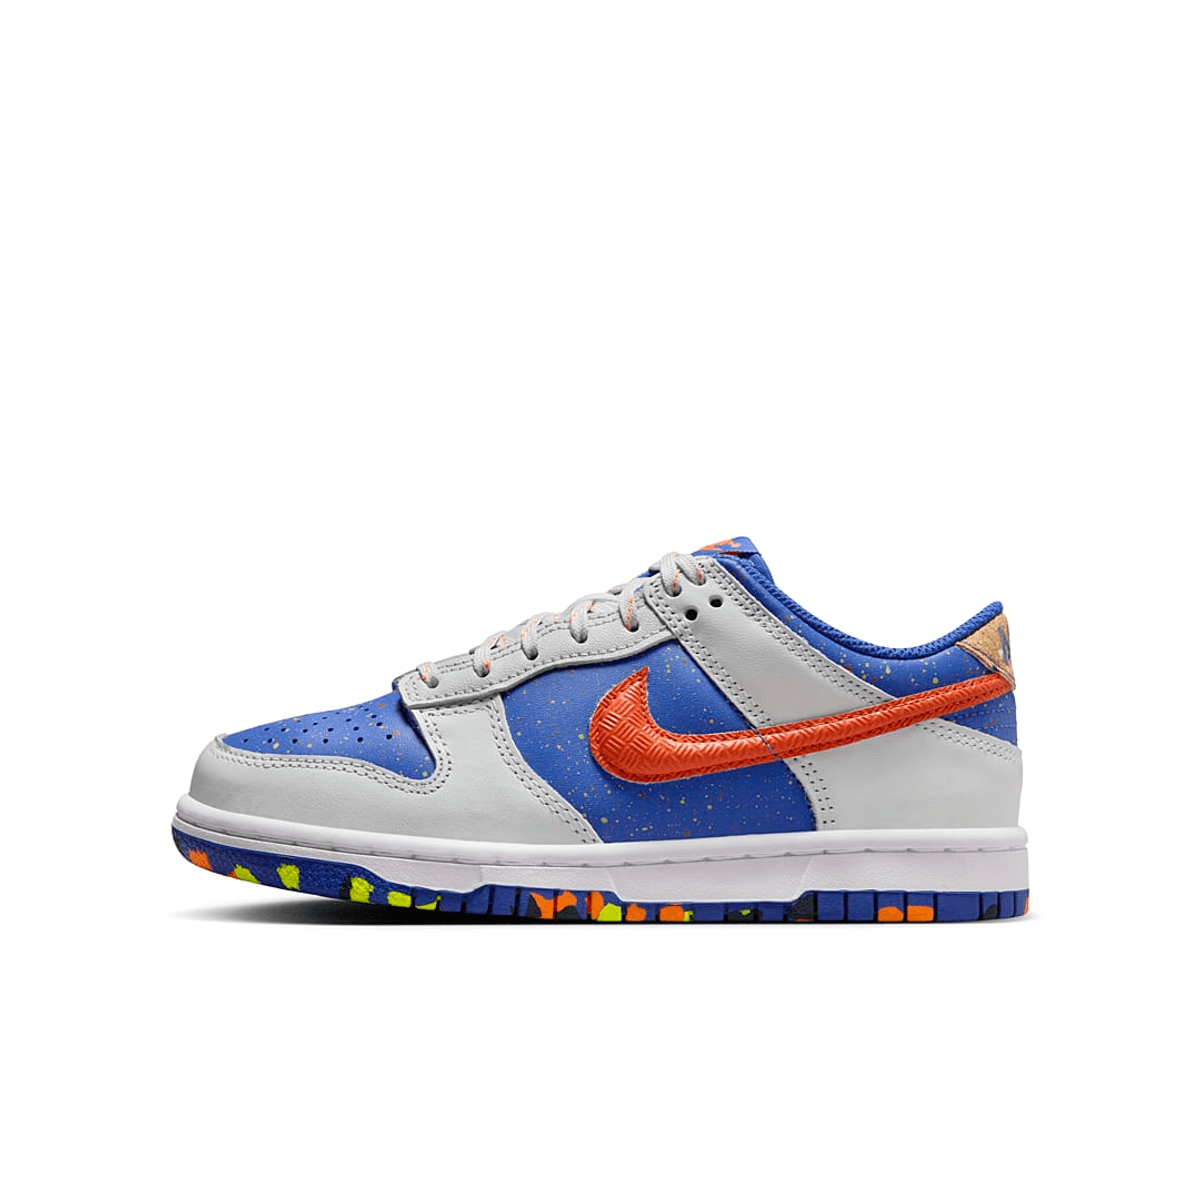 Official Images Of The Nike Dunk Low GS “Paint Splatter”